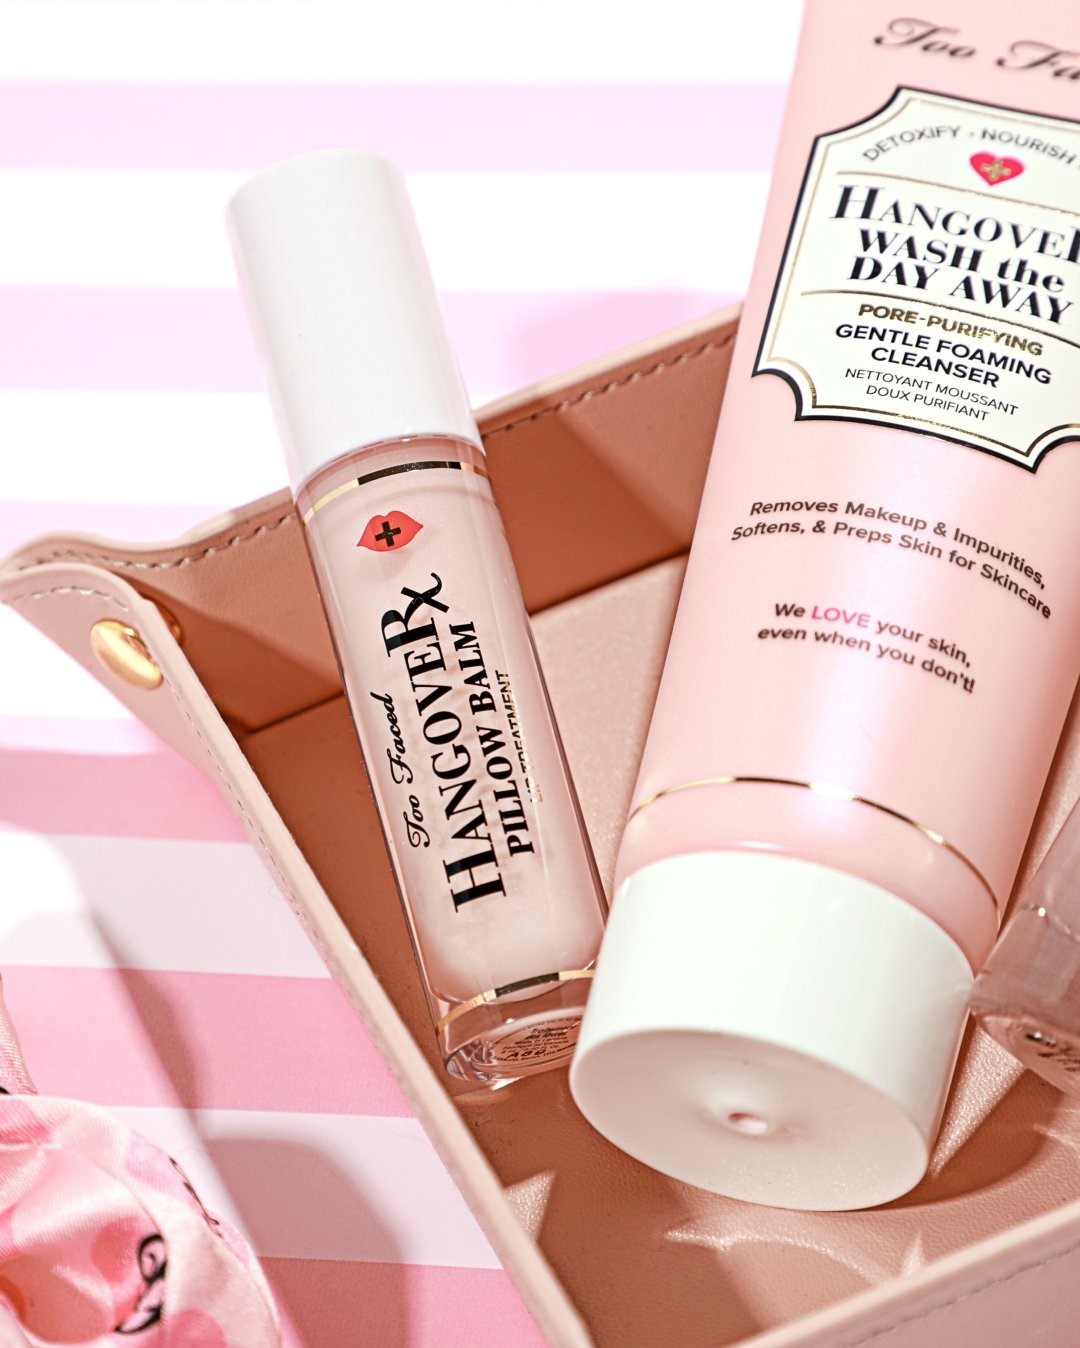 Too Faced Cosmetics - It's hydrating season and our best-selling Hangover Pillow Balm is BACK IN STOCK! 💦 Treat your lips to this pillowy soft, ultra-hydrating & replenishing Lip Treatment. #tfhangove...